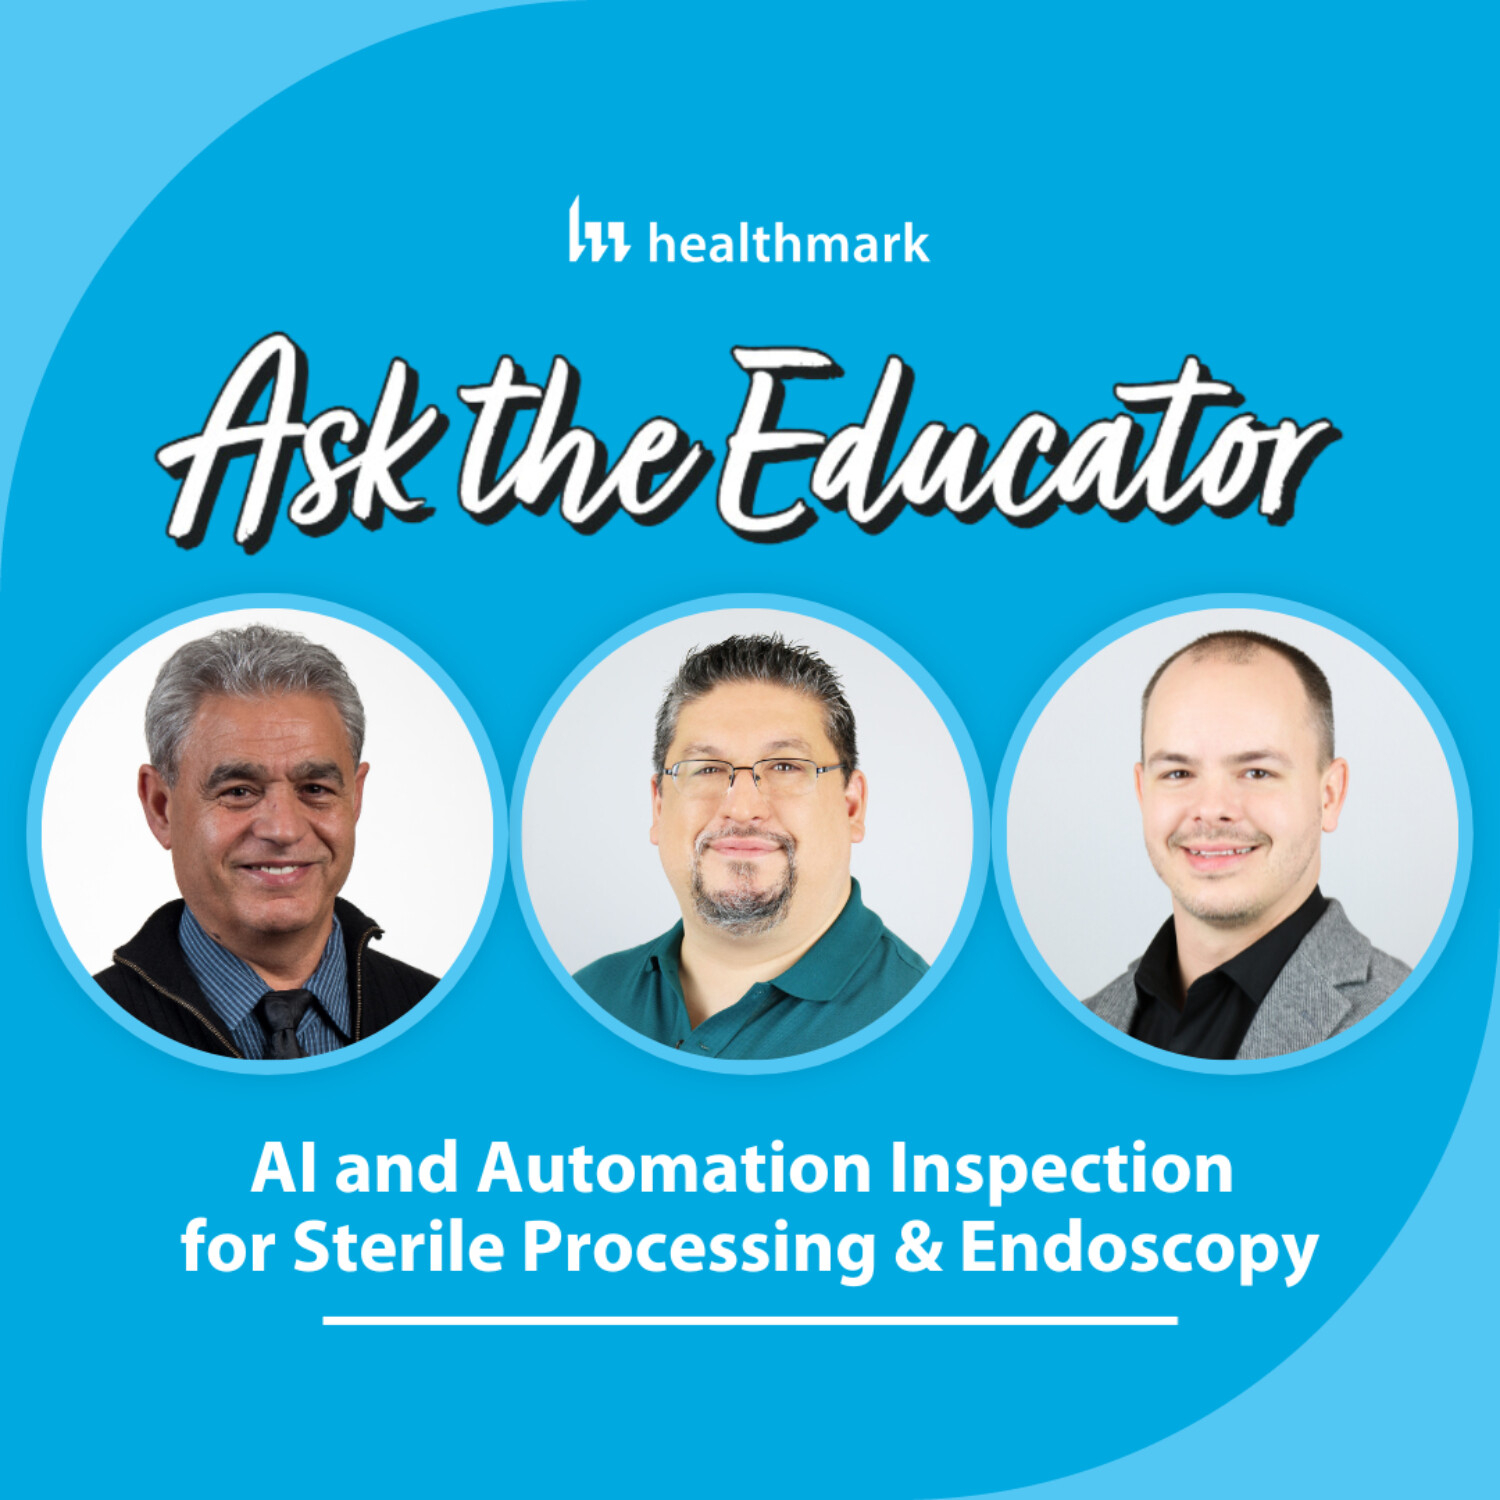 98. AI and Automation Inspection for Sterile Processing & Endoscopy